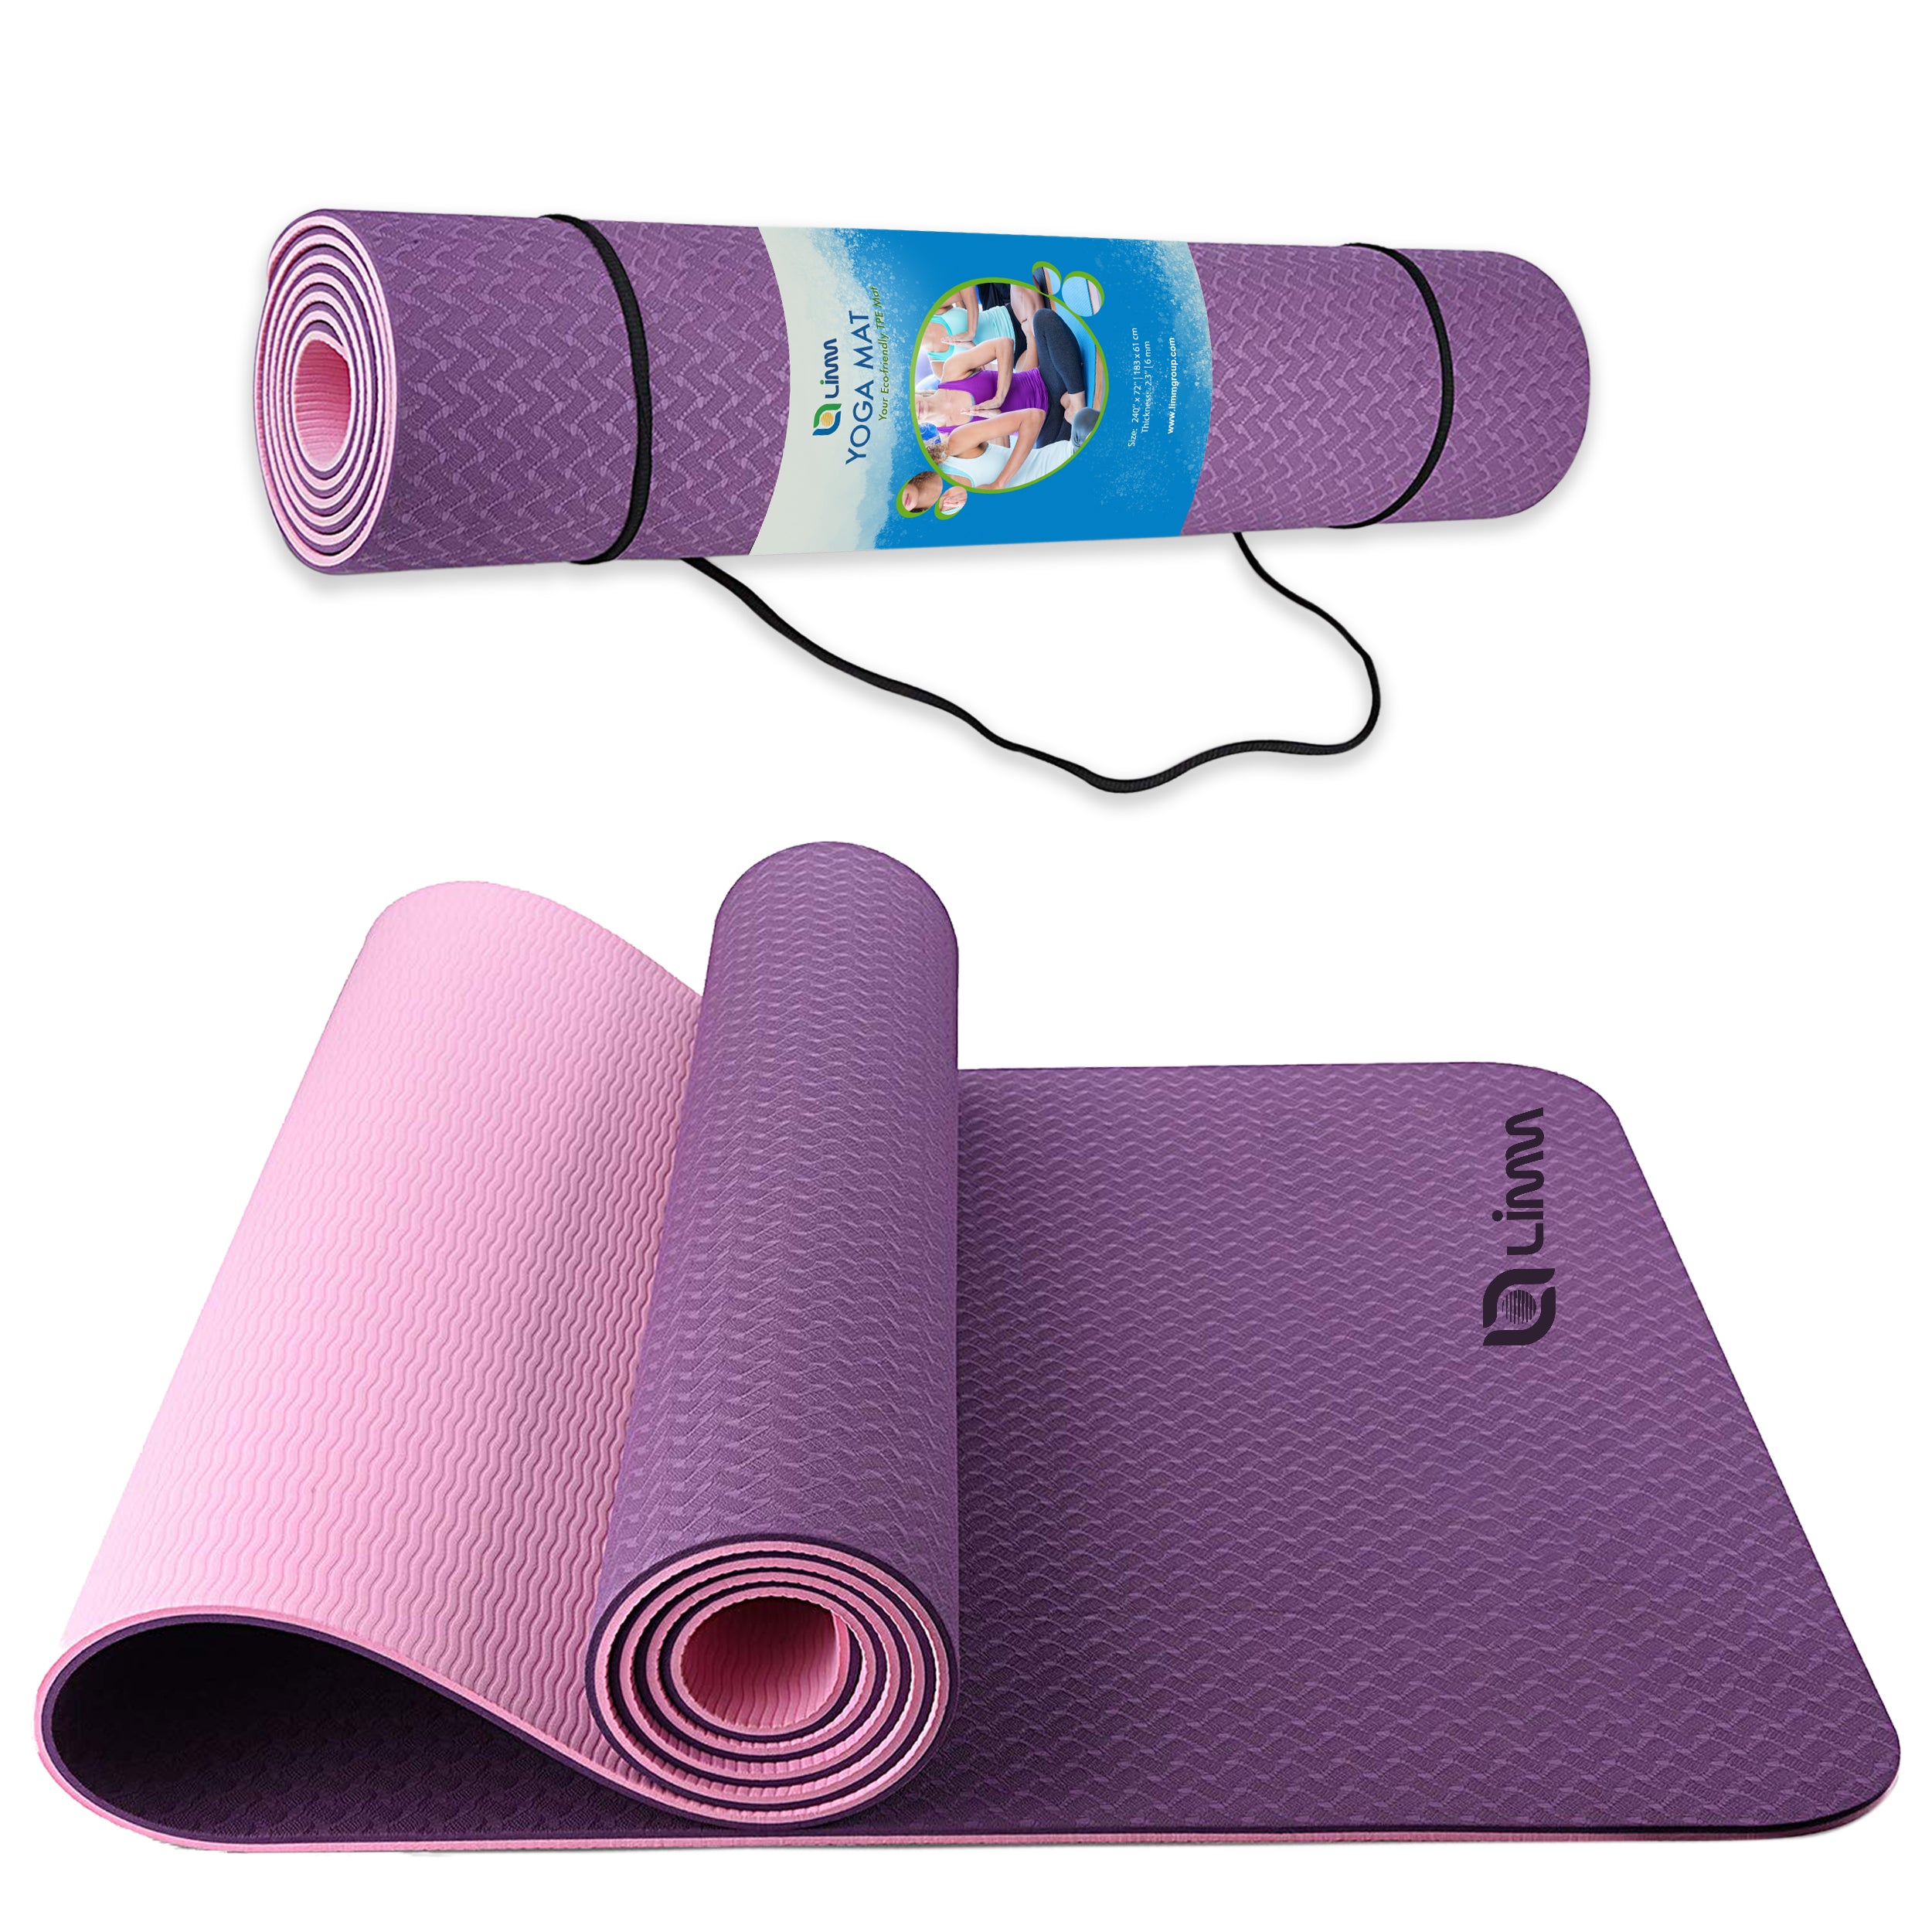 INNHOM YOGA MAT DOUBLE SIDED PINK & PURPLE 5/16 x 6 FT. BRAND NEW